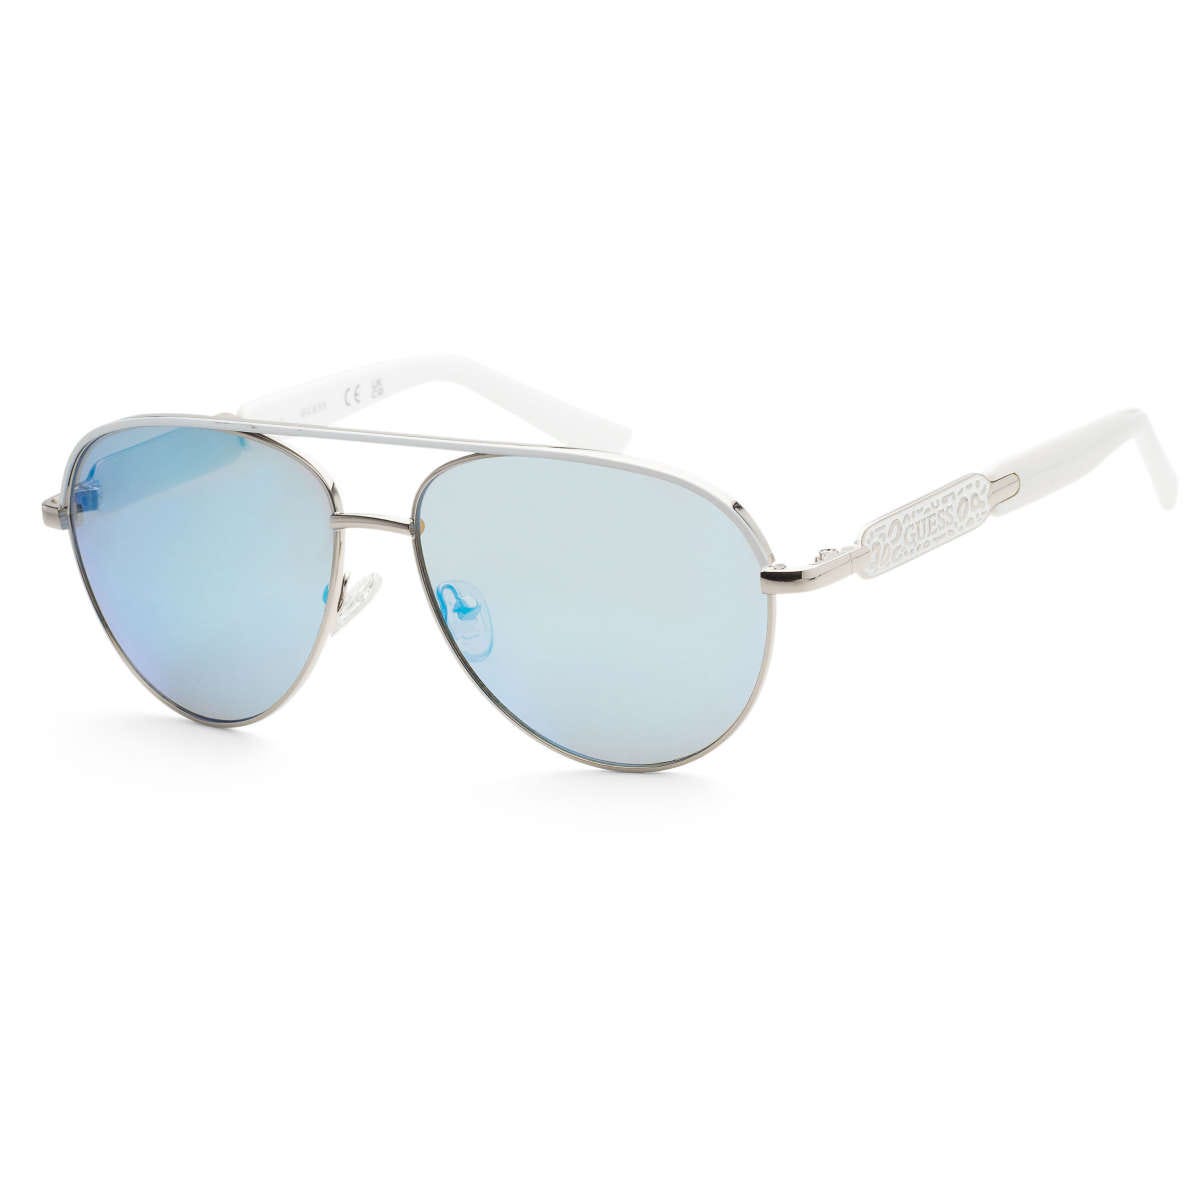 A pair of aviator sunglasses with blue tinted lenses and white temples.